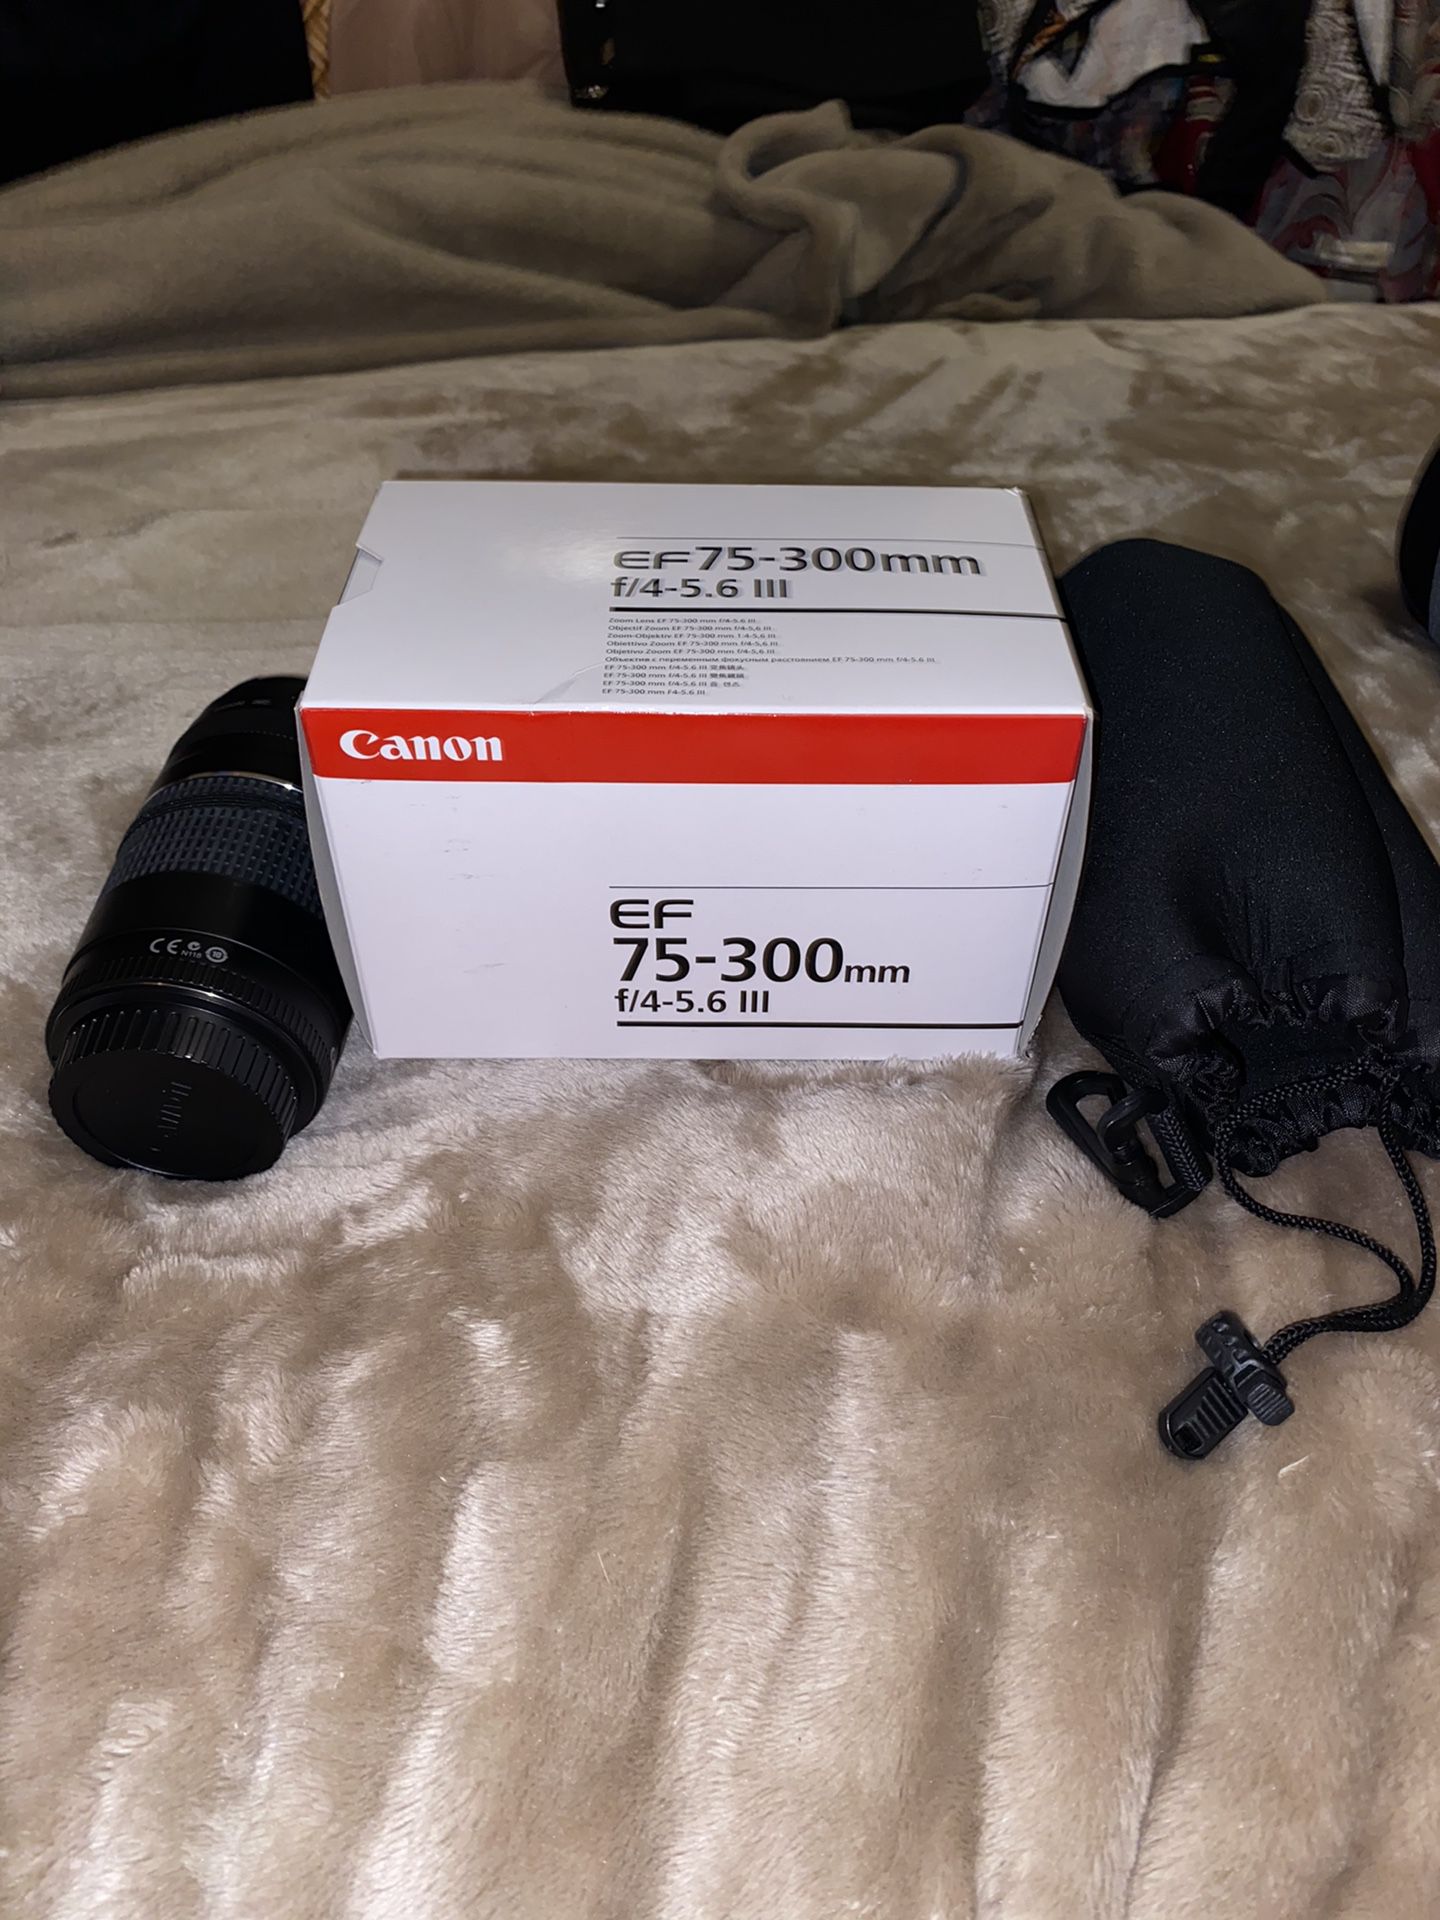 Sale Plantation, Telephoto - Zoom Cameras for in Canon for f/4-5.6 Canon III 75-300mm EF Lens FL SLR OfferUp